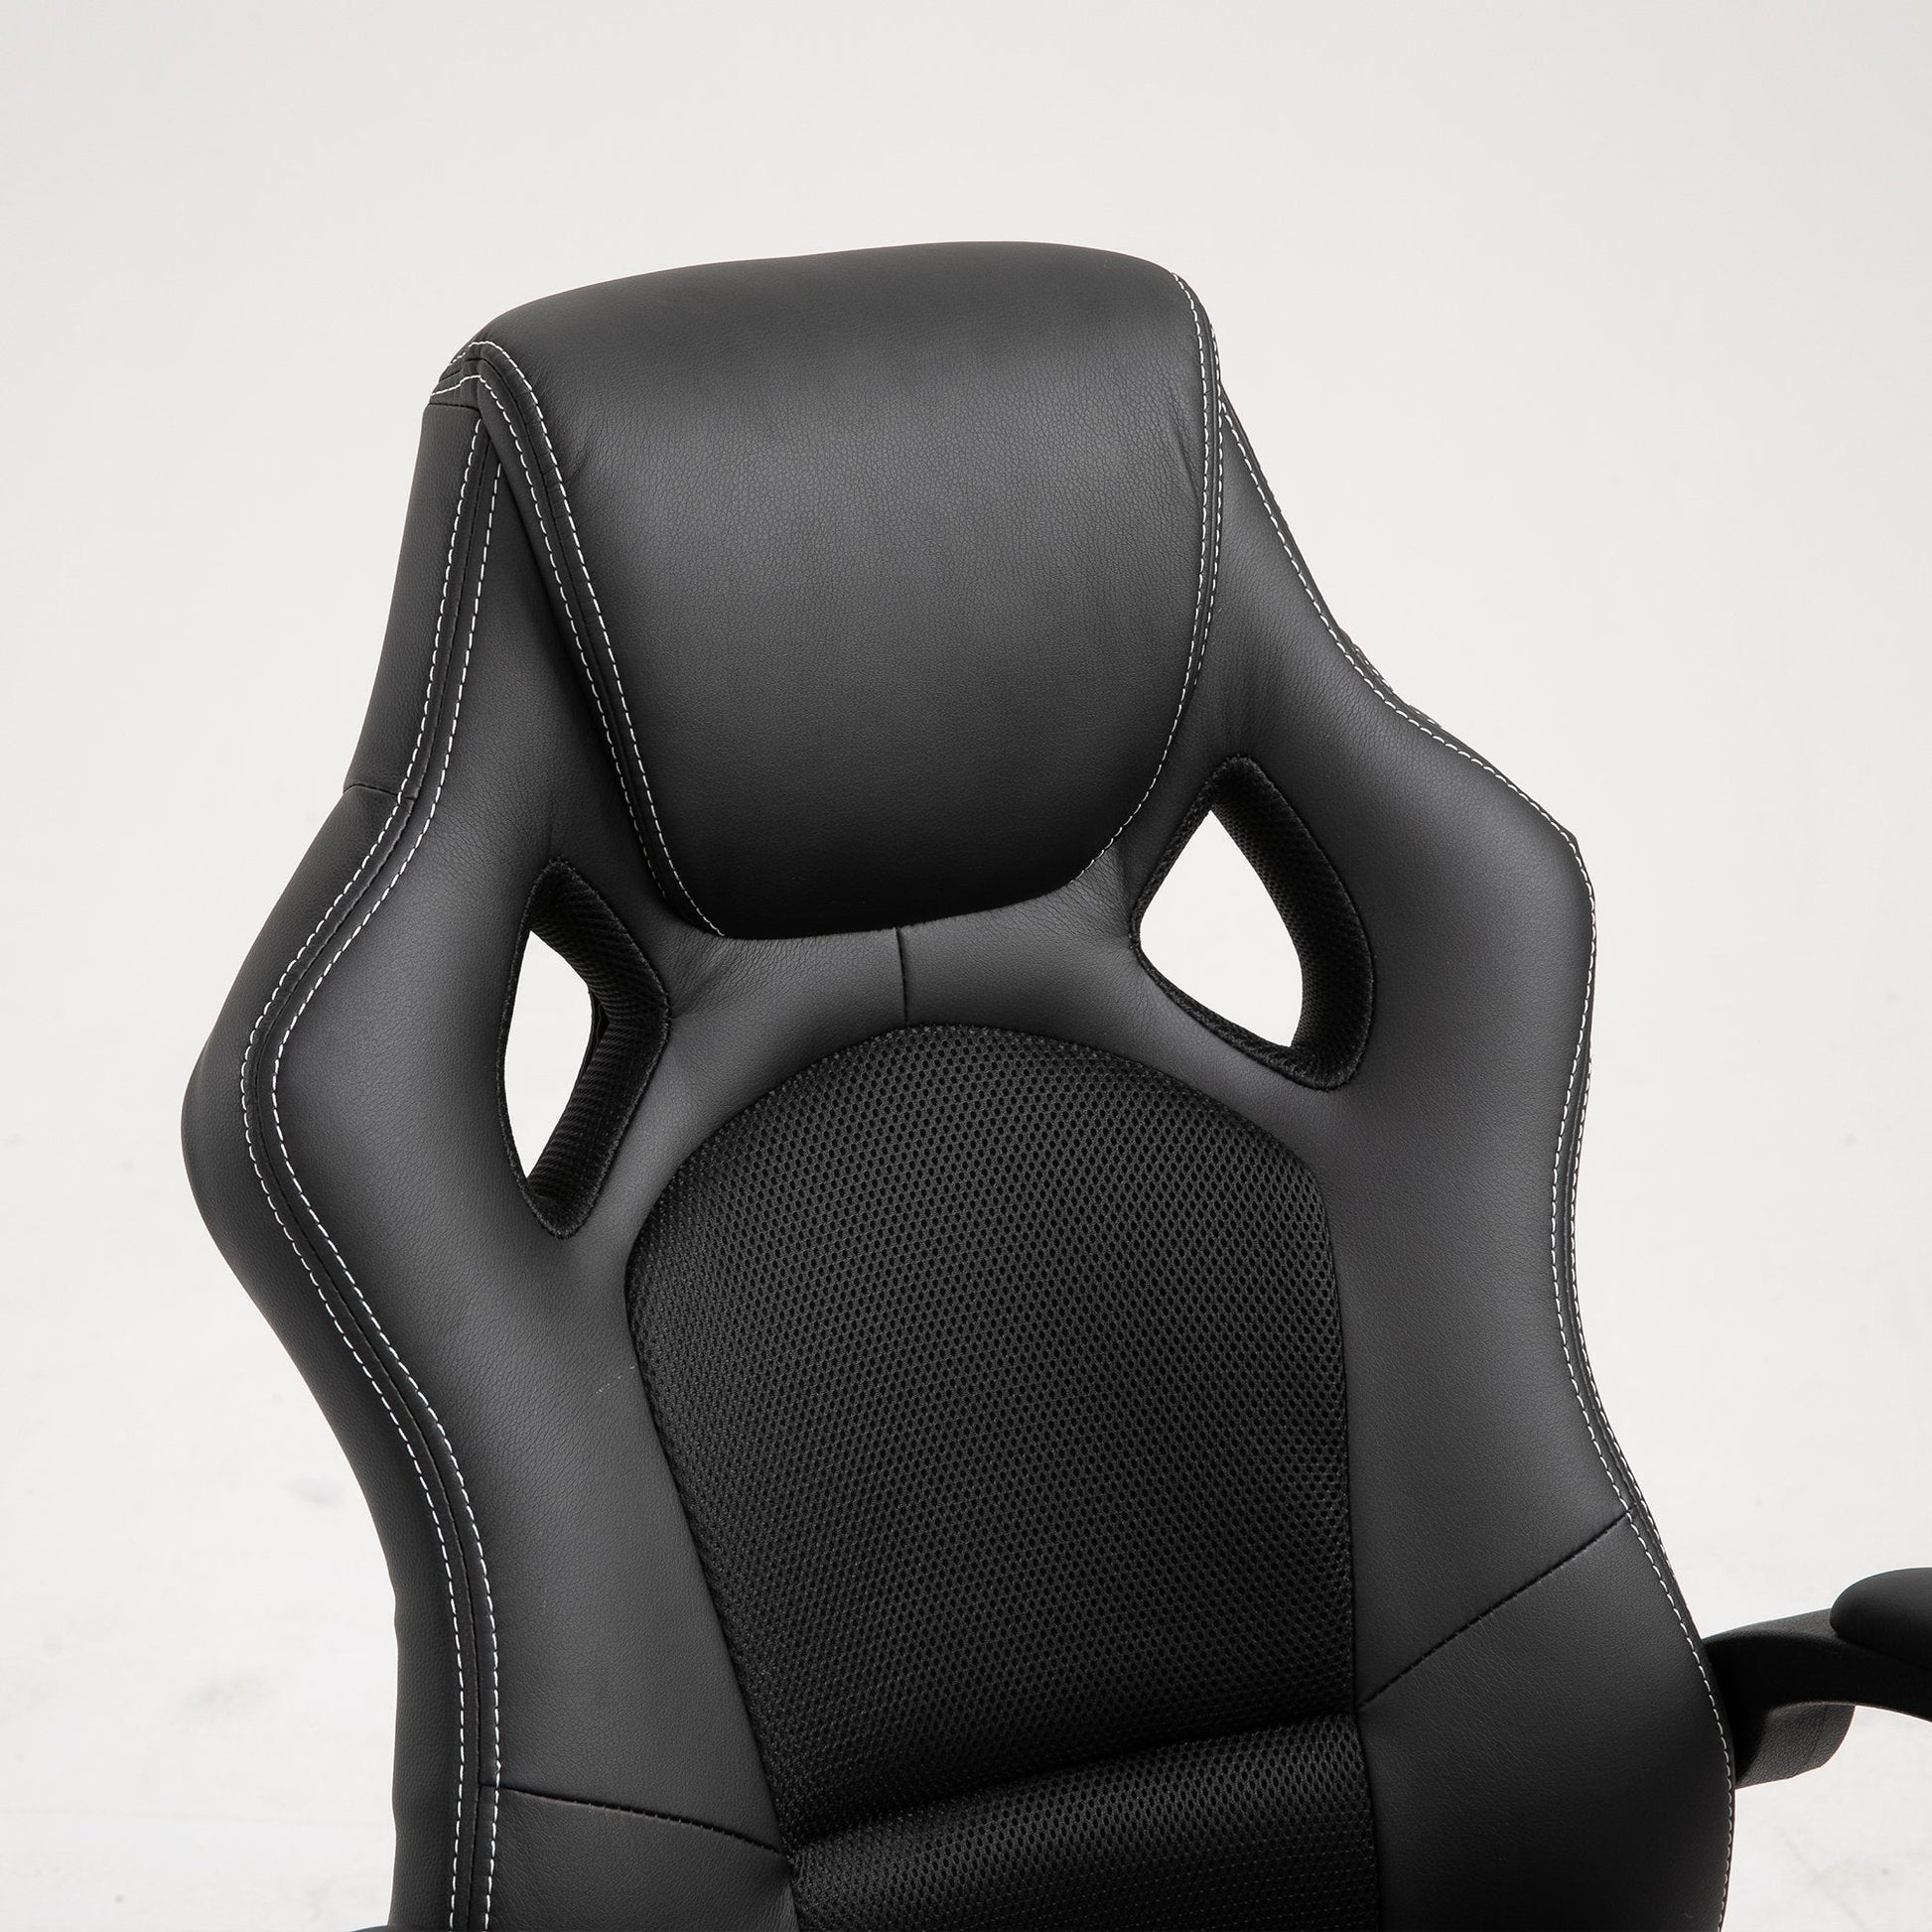 Racing Gaming Chair High Back Office Chair Computer Desk Gamer Chair with Swivel Wheels, Padded Headrest, Tilt Function, Black - Gallery Canada